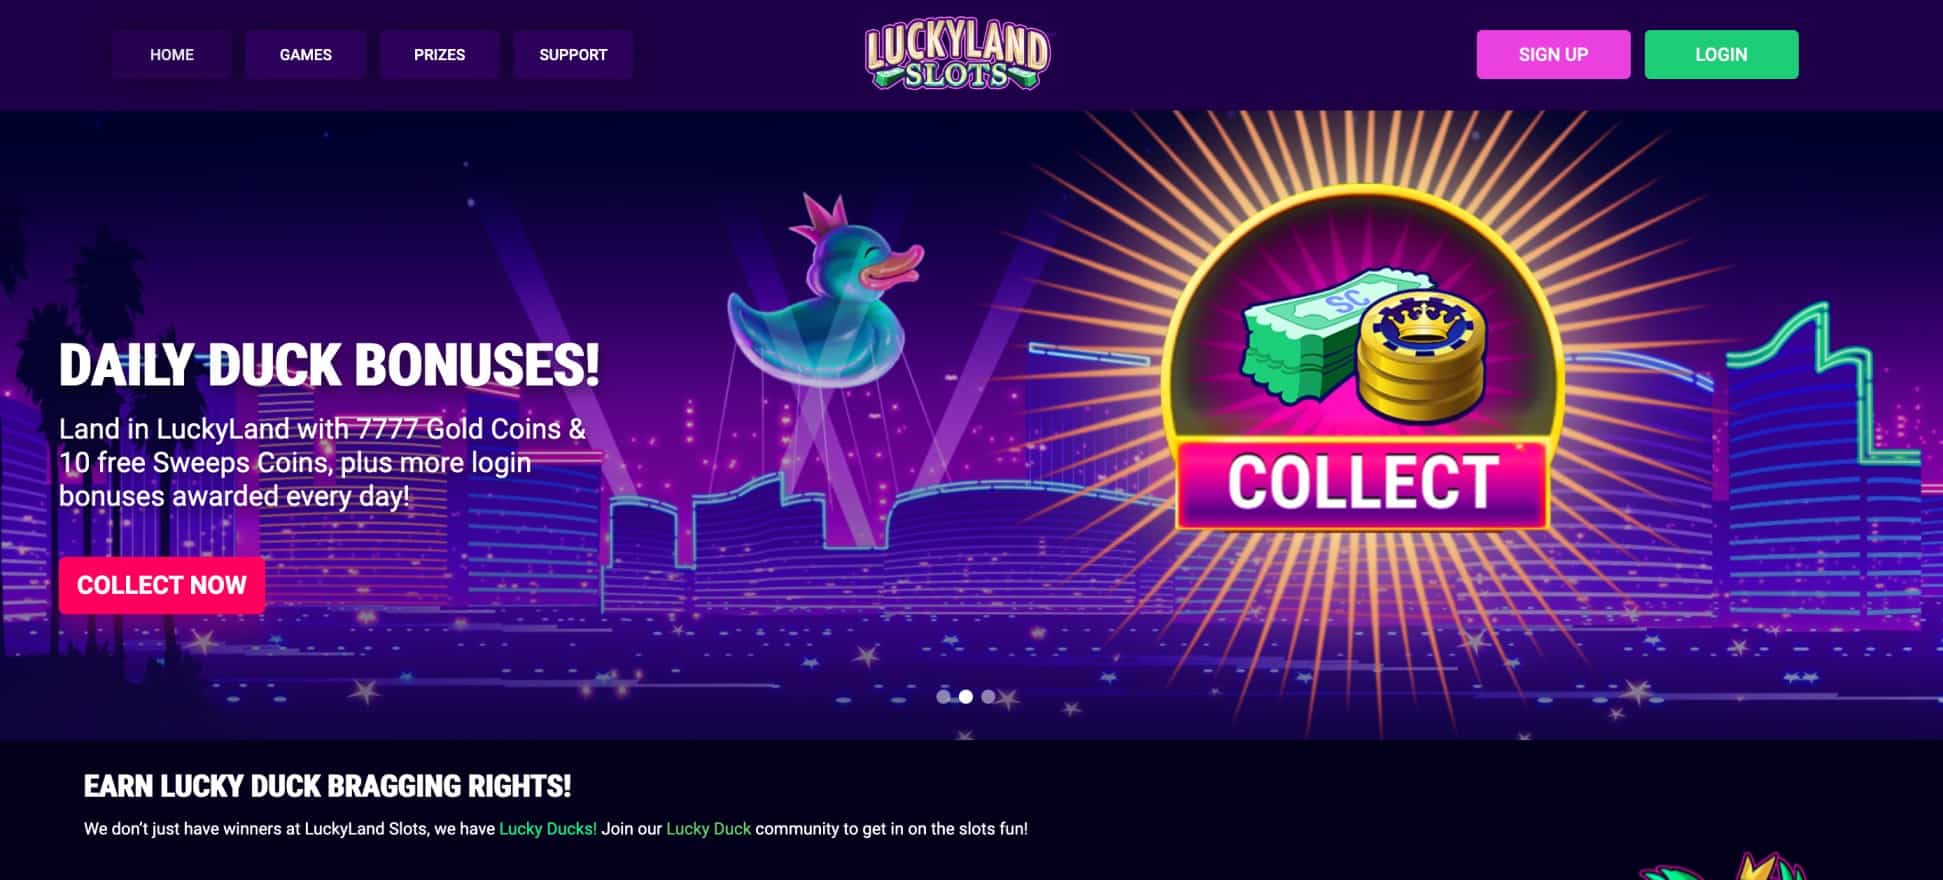 LuckyLand Slots review